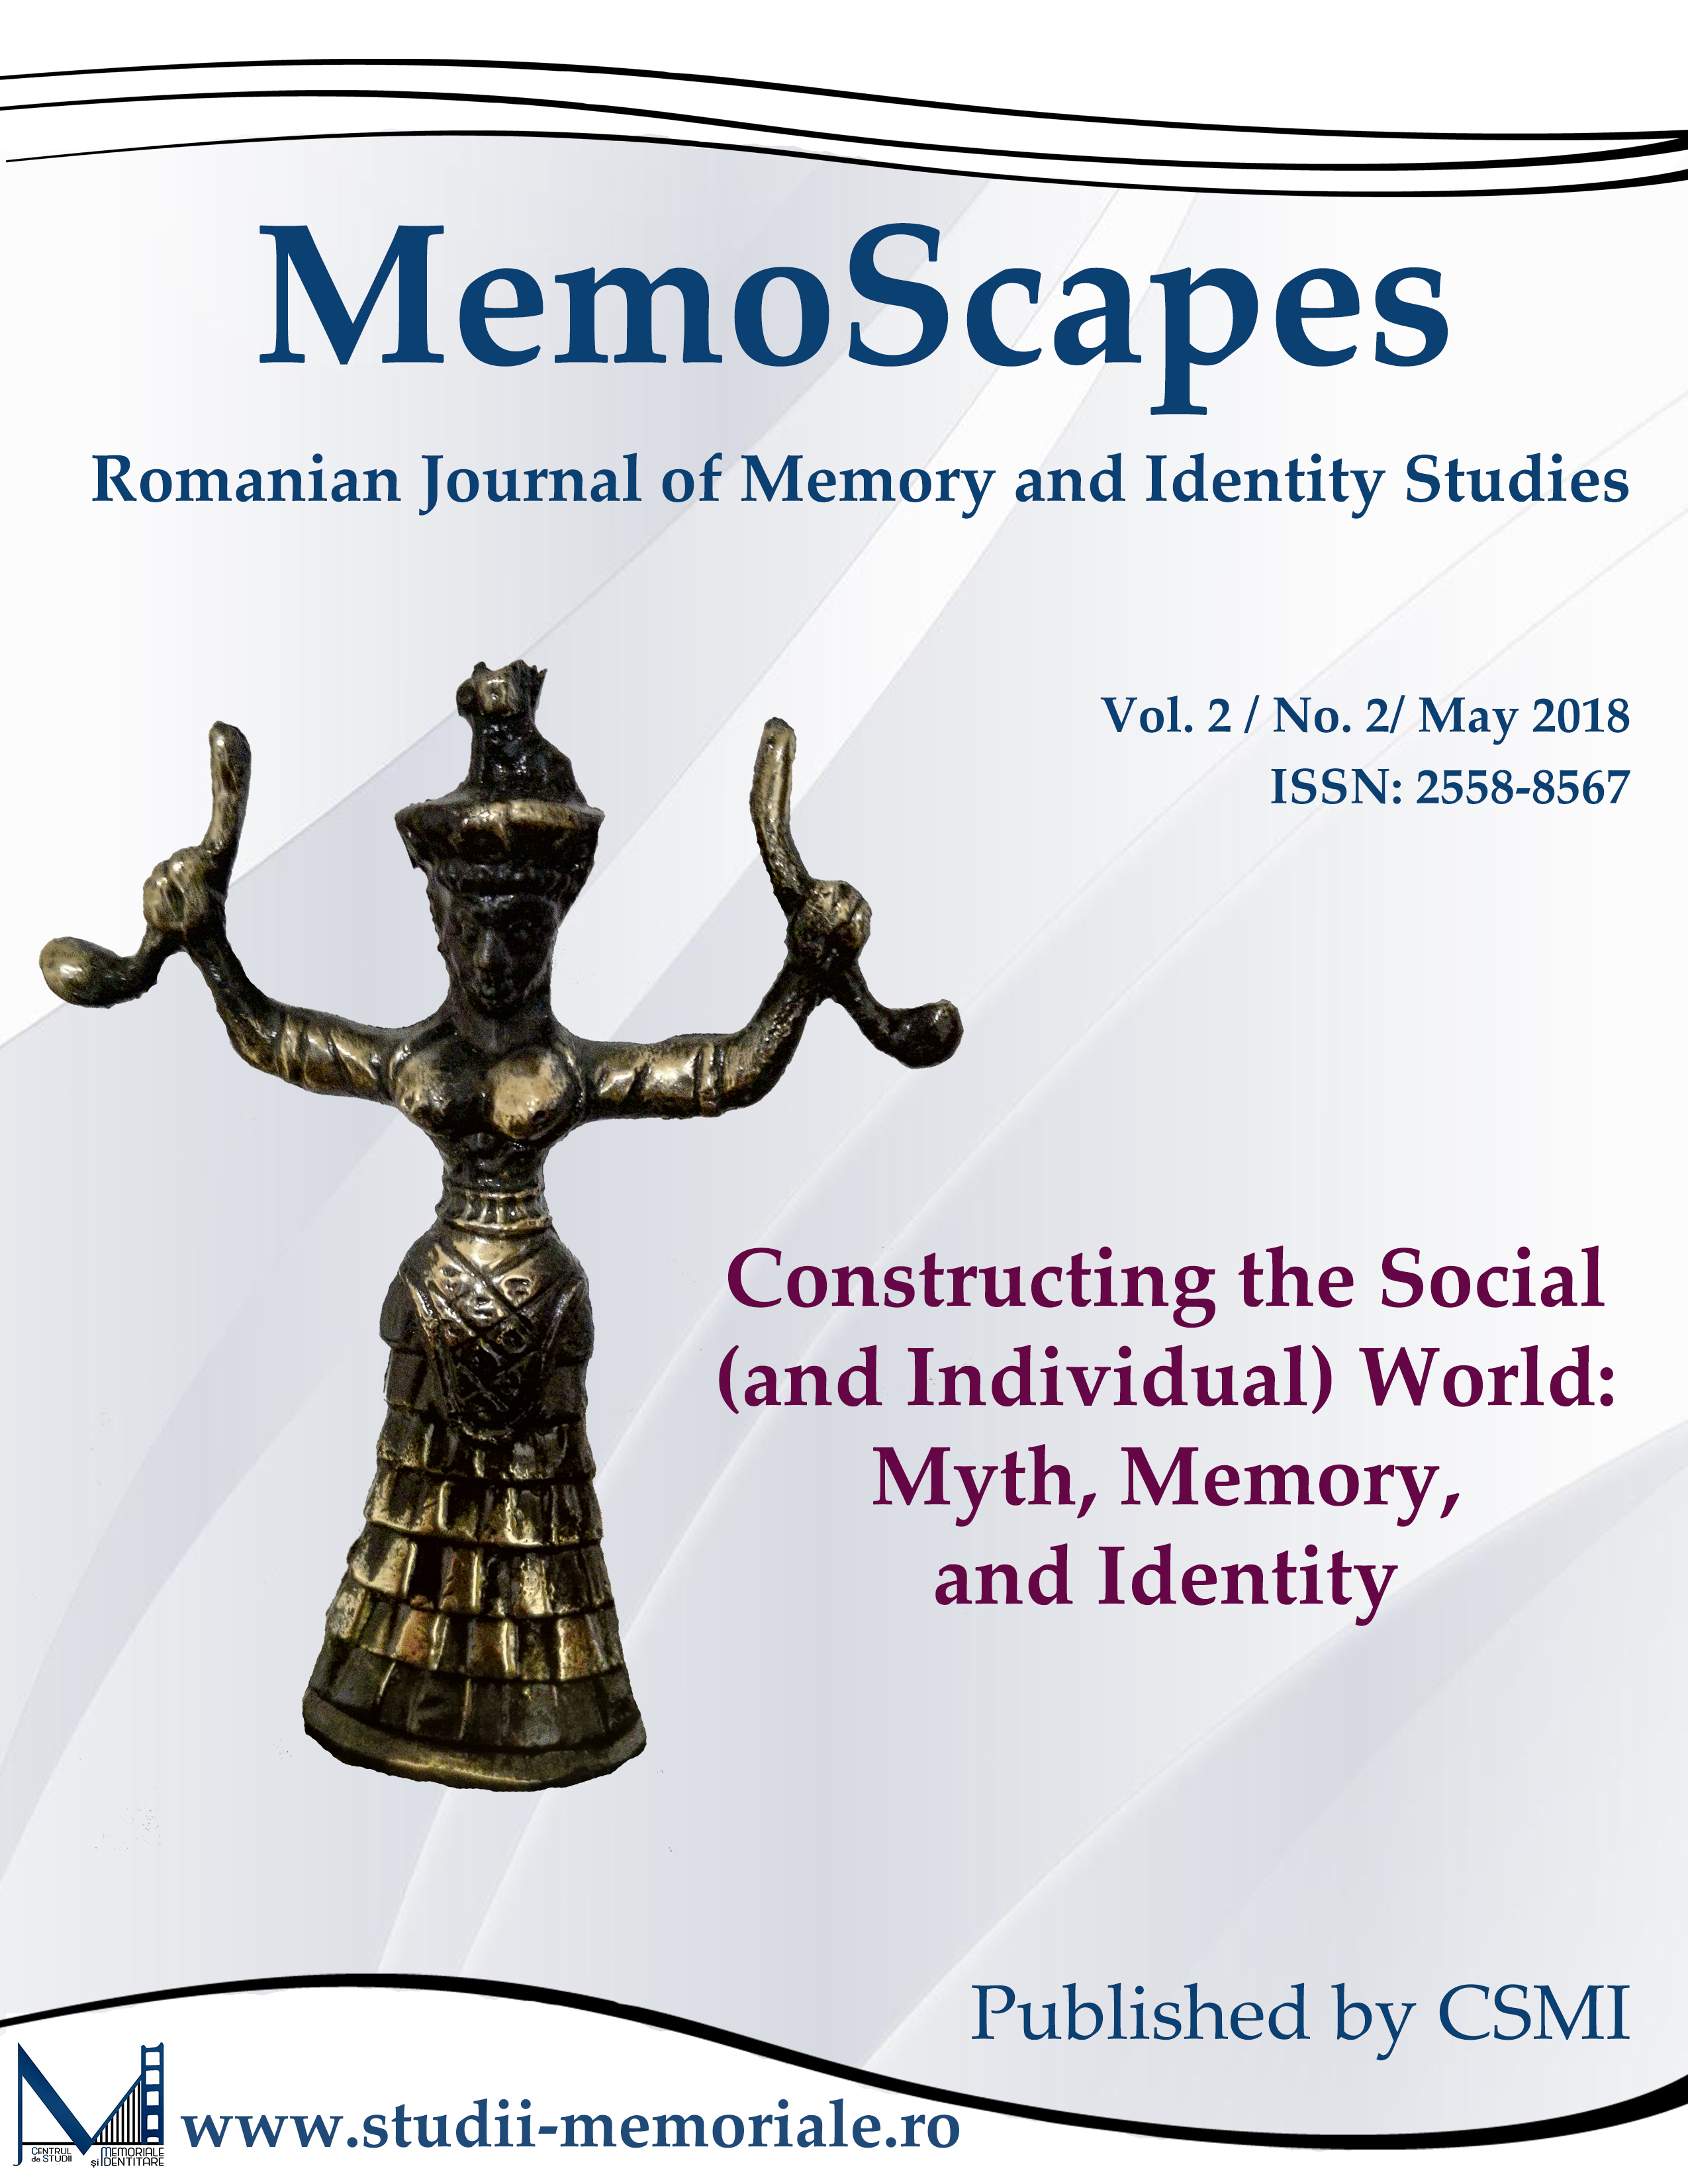 Call for Papers MemoScapes, issue 3/2019: Regional, National, Local, and Social Identities in Central Europe and the Black Sea Region in the last 100 years